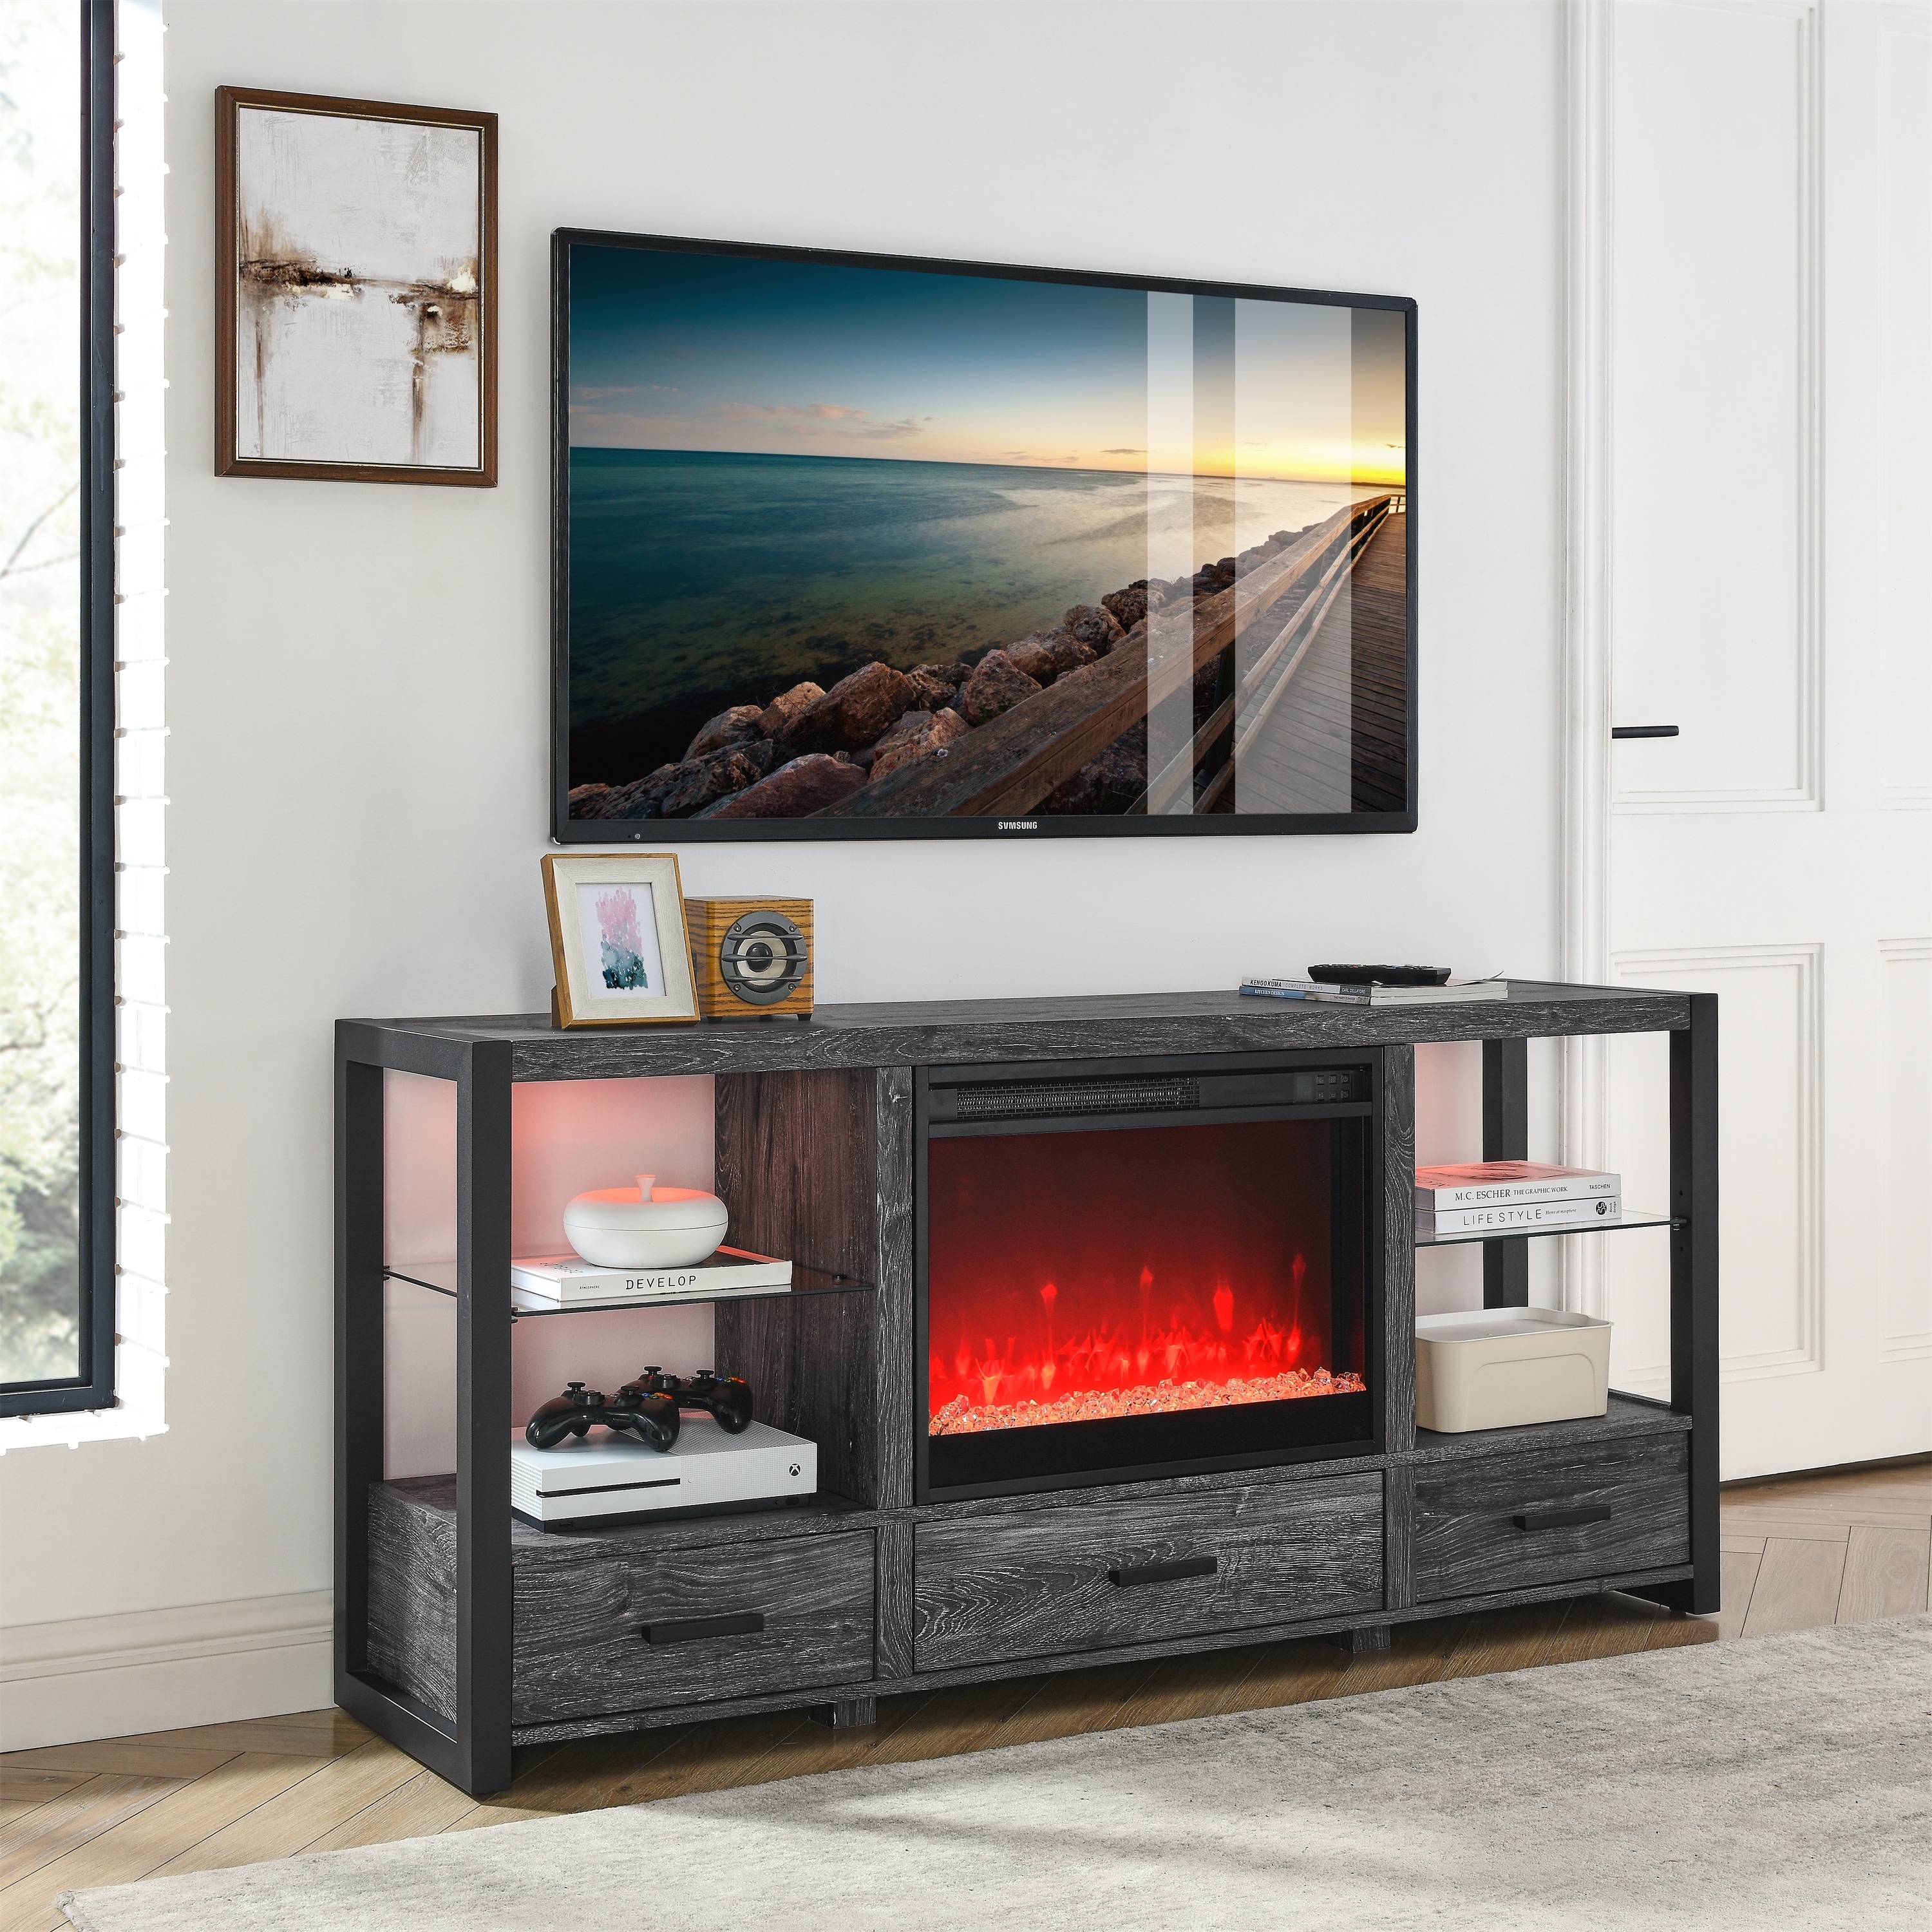 https://ak1.ostkcdn.com/images/products/is/images/direct/6c9709d3a131fcc2e9c25d8b936430392a401cc8/Rustic-Electric-Fireplace-TV-Stand-for-TVs-Up-to-70%22-with-Multiple-Storage%2C-Oak-28%27%27-H-x-15.7%27%27-D-x-60%27%27-W.jpg